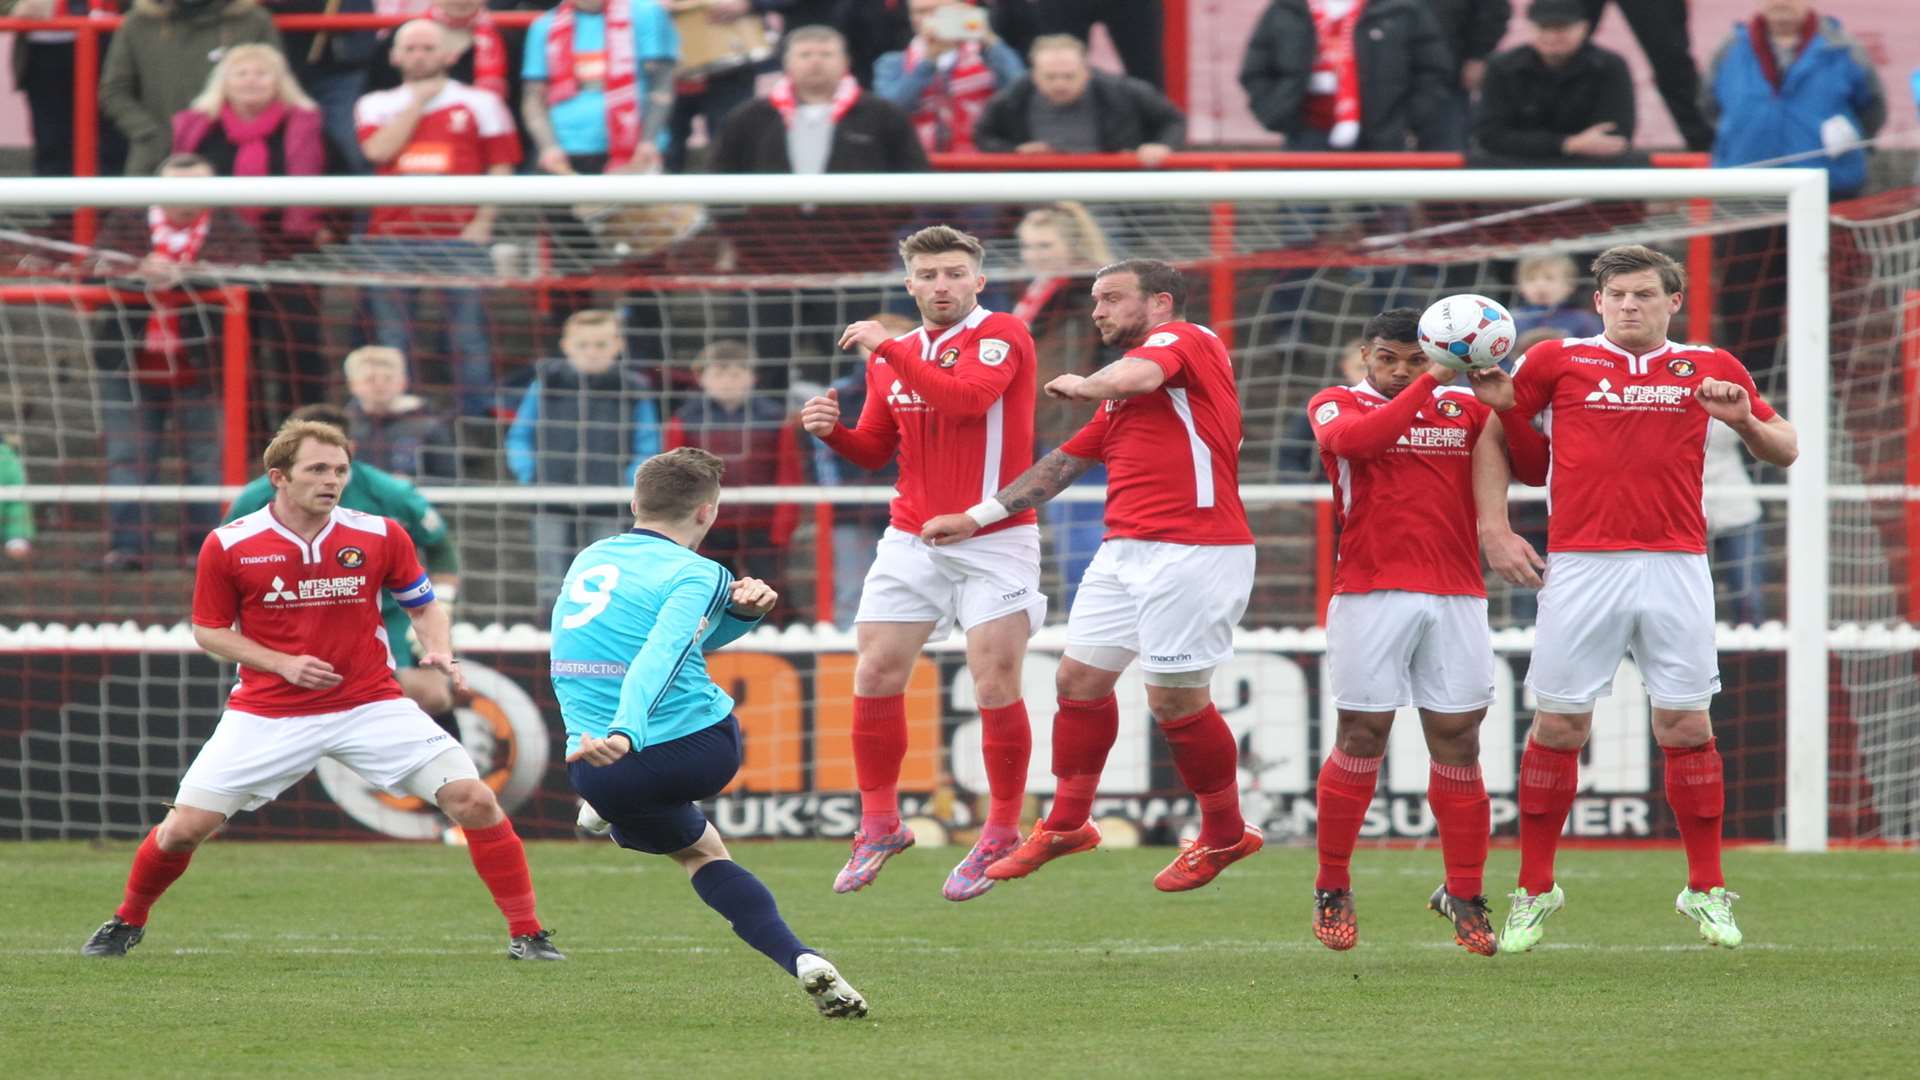 Whitehawk's Jake Robinson hit the post with this free-kick Picture: John Westhrop